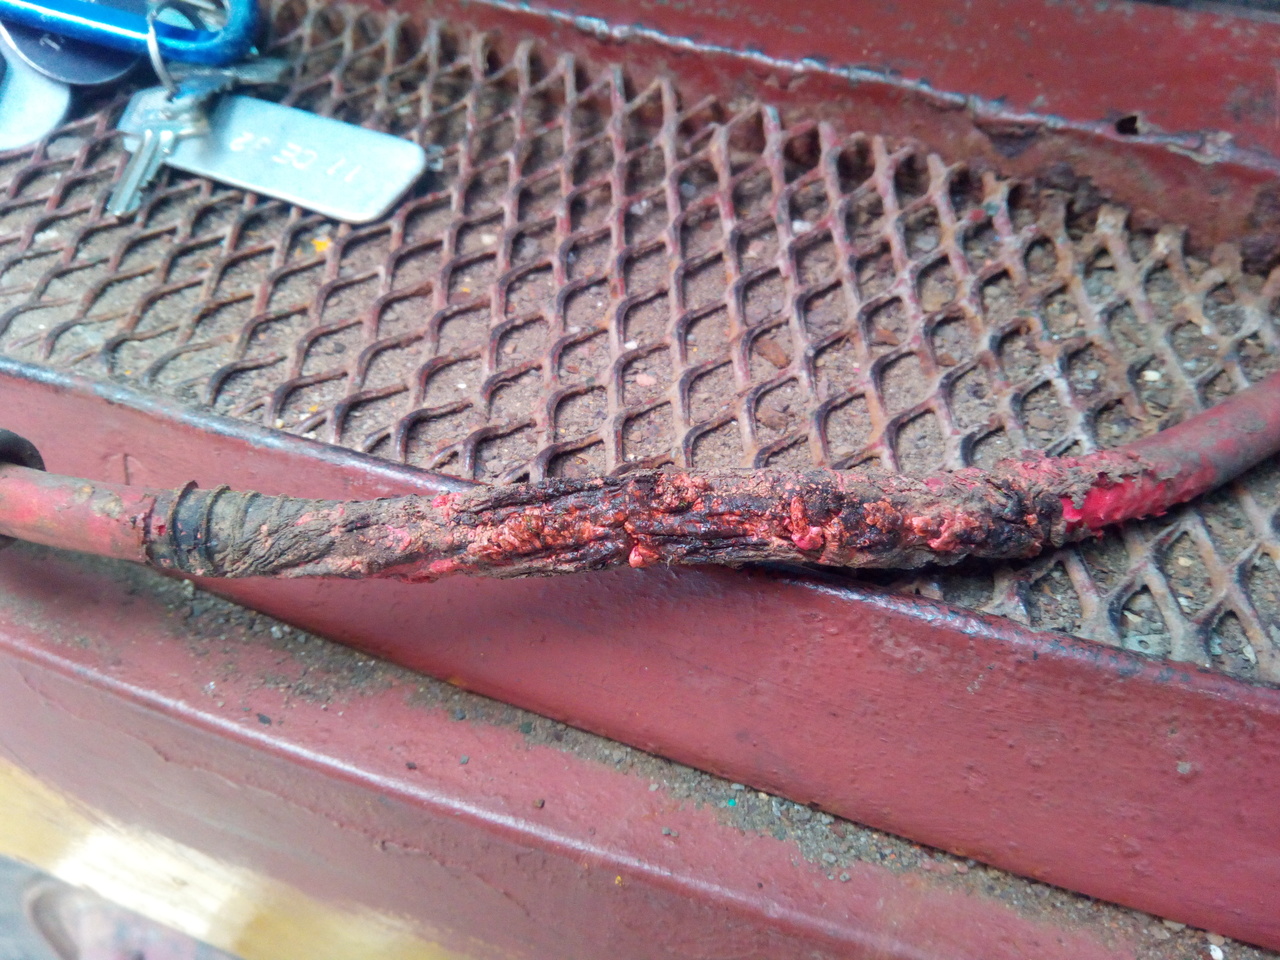 Very charred and burnt battery cable laying on the tread-plate of
the passenger's door step.